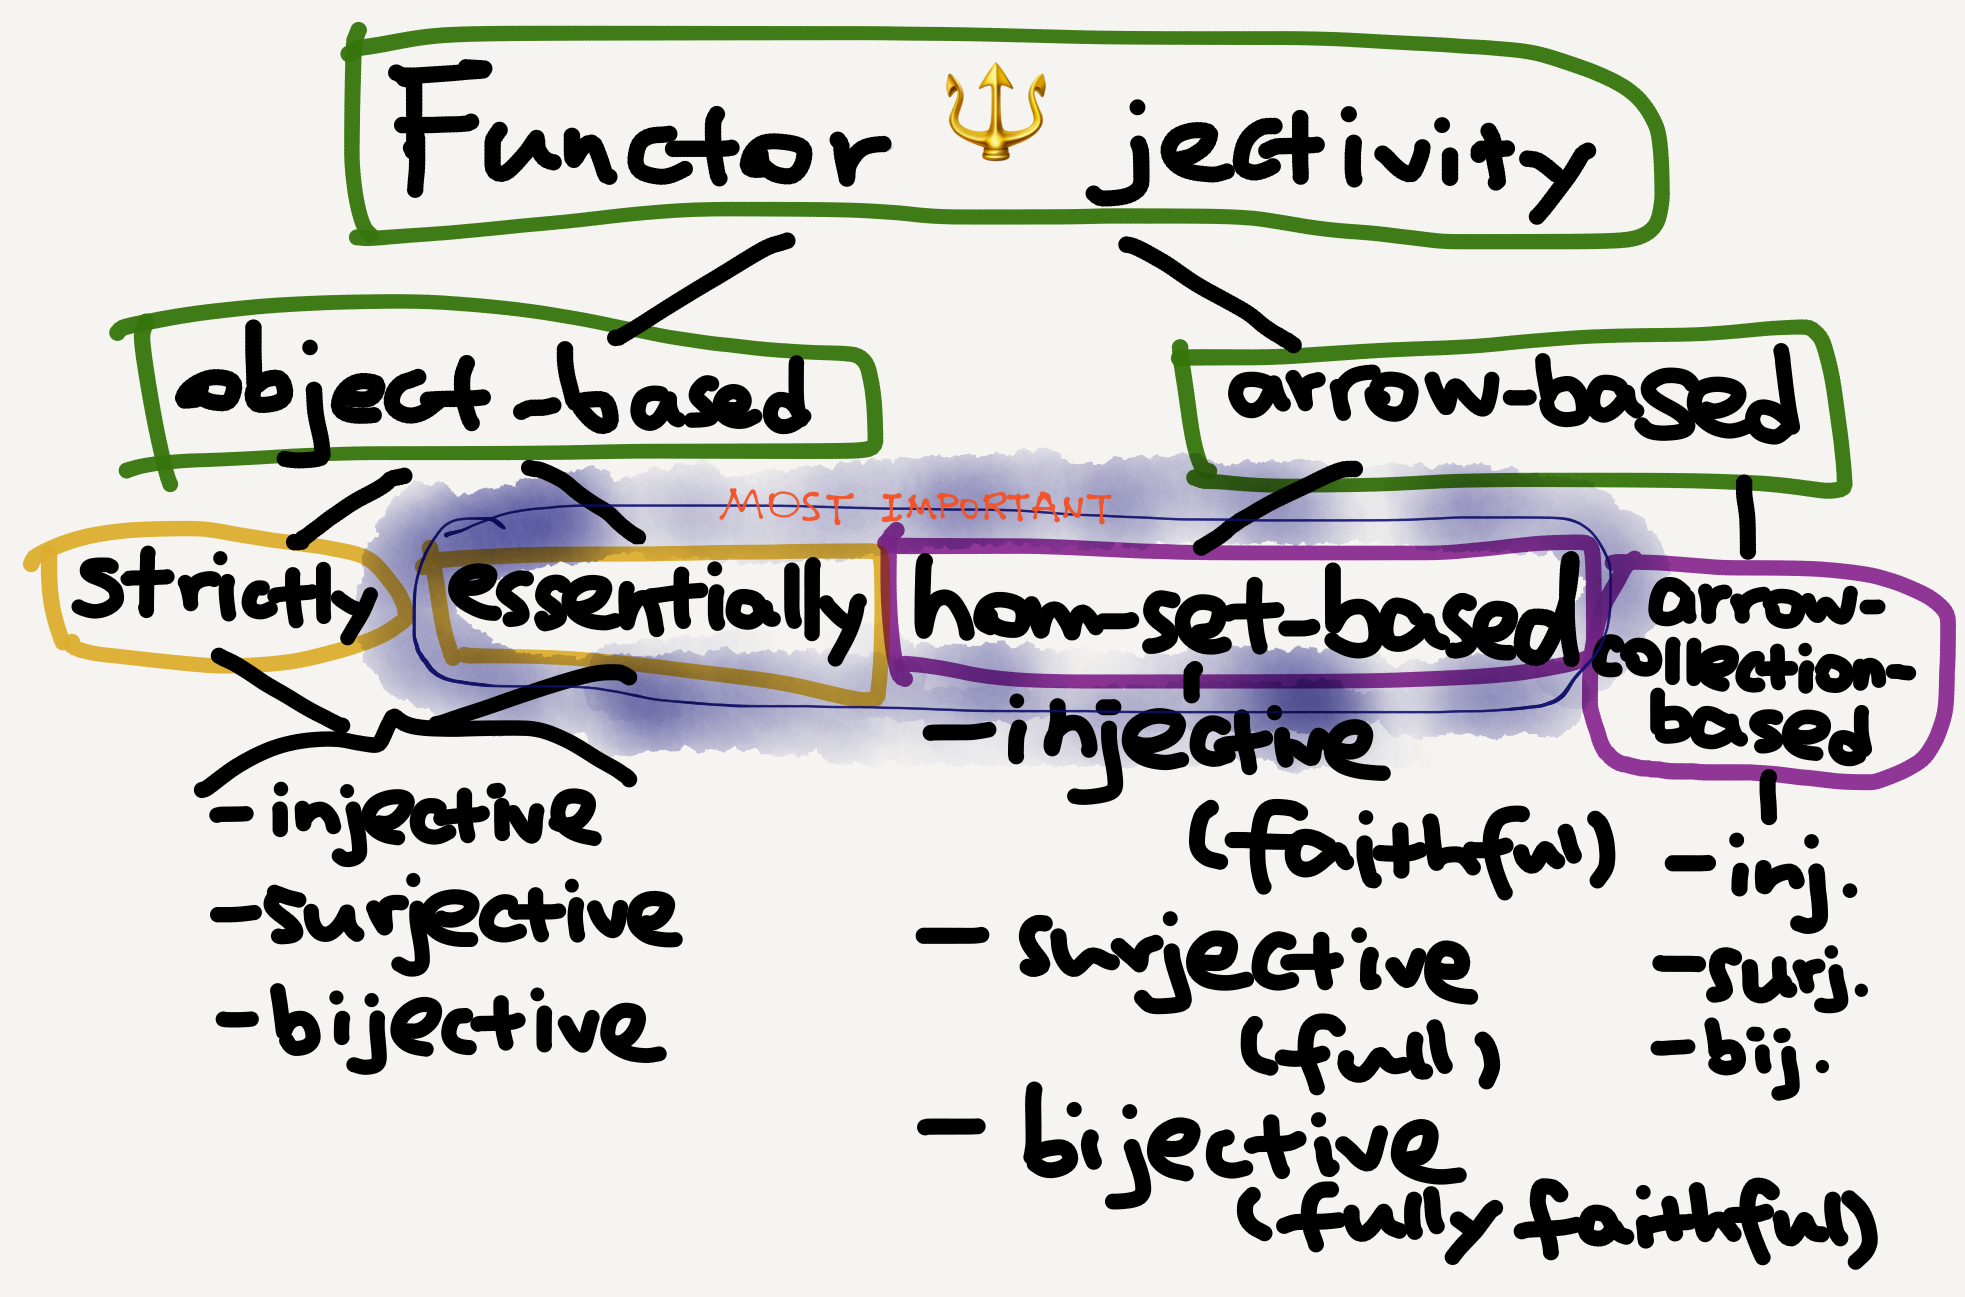 A summary of jectivity-based functor classification